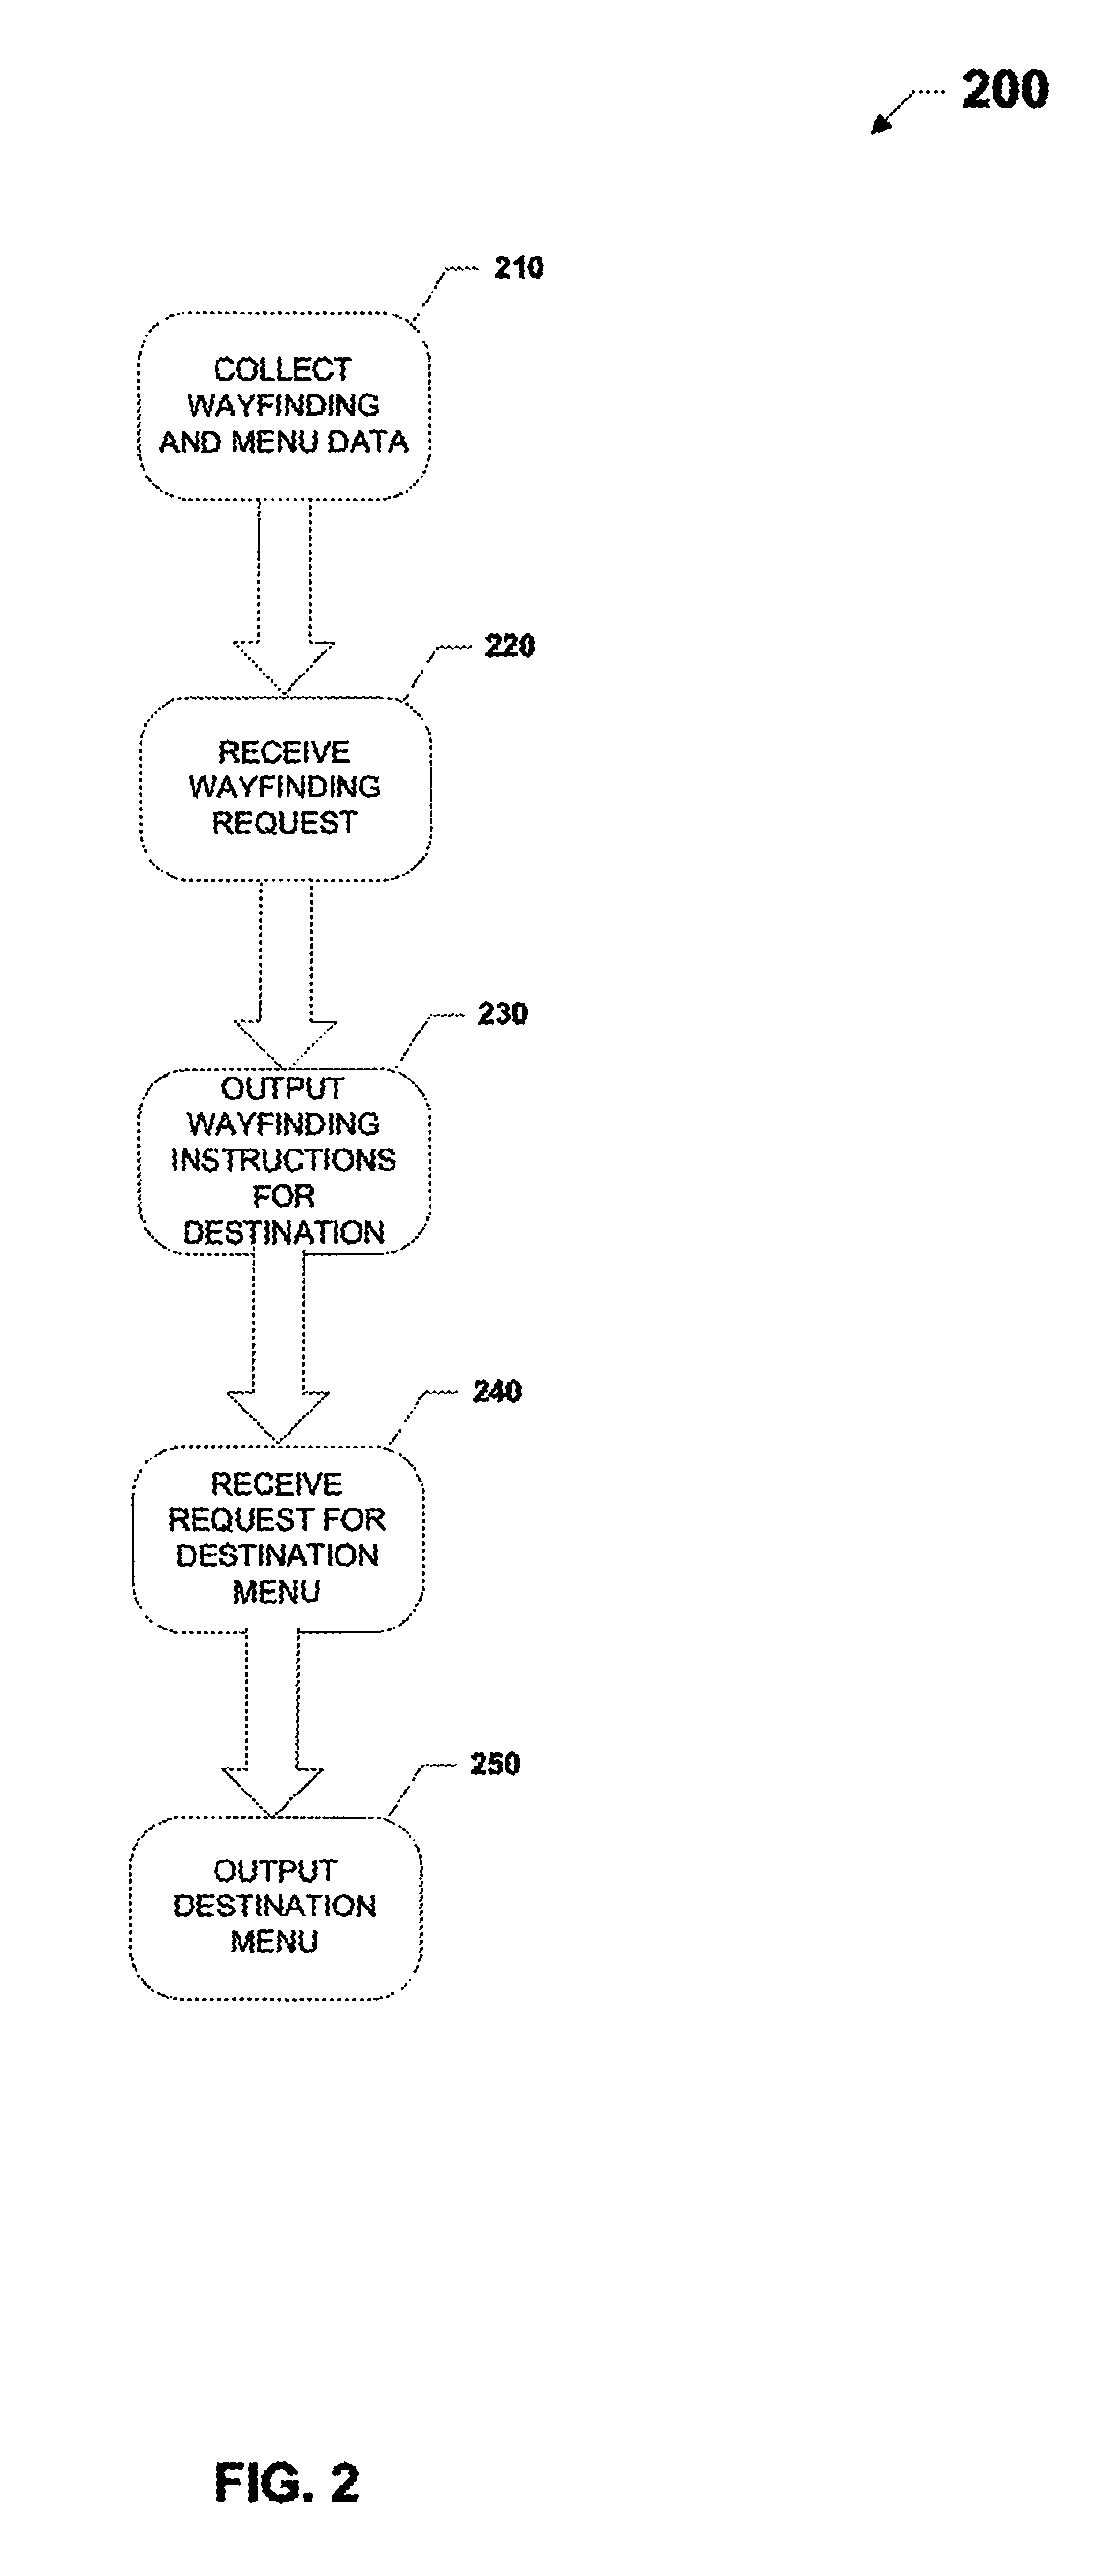 Systems, methods, and software for providing wayfinding orientation and wayfinding data to blind travelers